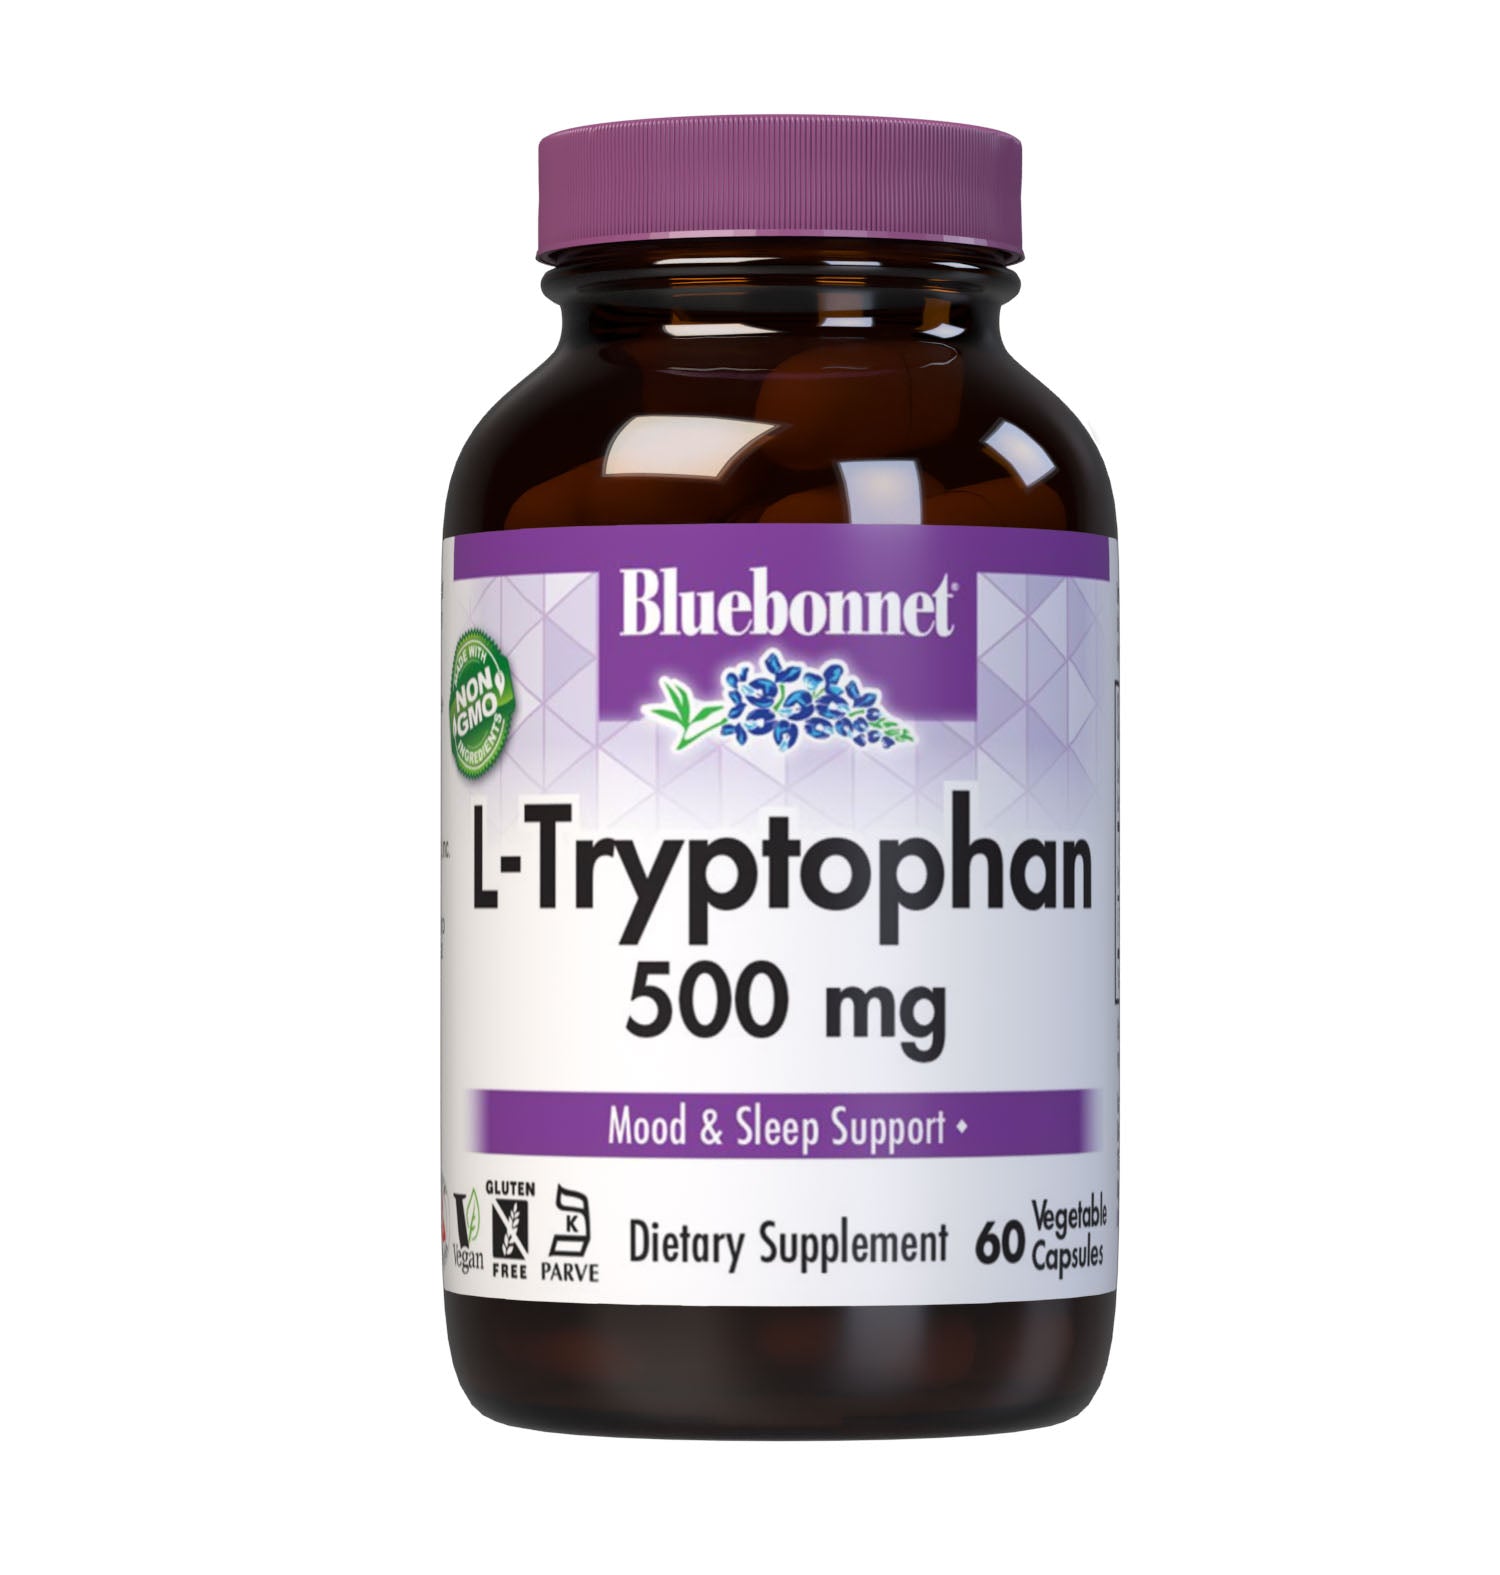 Bluebonnet’s L-Tryptophan 500 mg 60 Vegetable Capsules are formulated with a vegetarian source of the free-form amino acid L-tryptophan called TryptoPure from Ajinomoto to help support a positive mood, a sense of relaxation, as well as to reduce occasional sleeplessness. #size_60 count